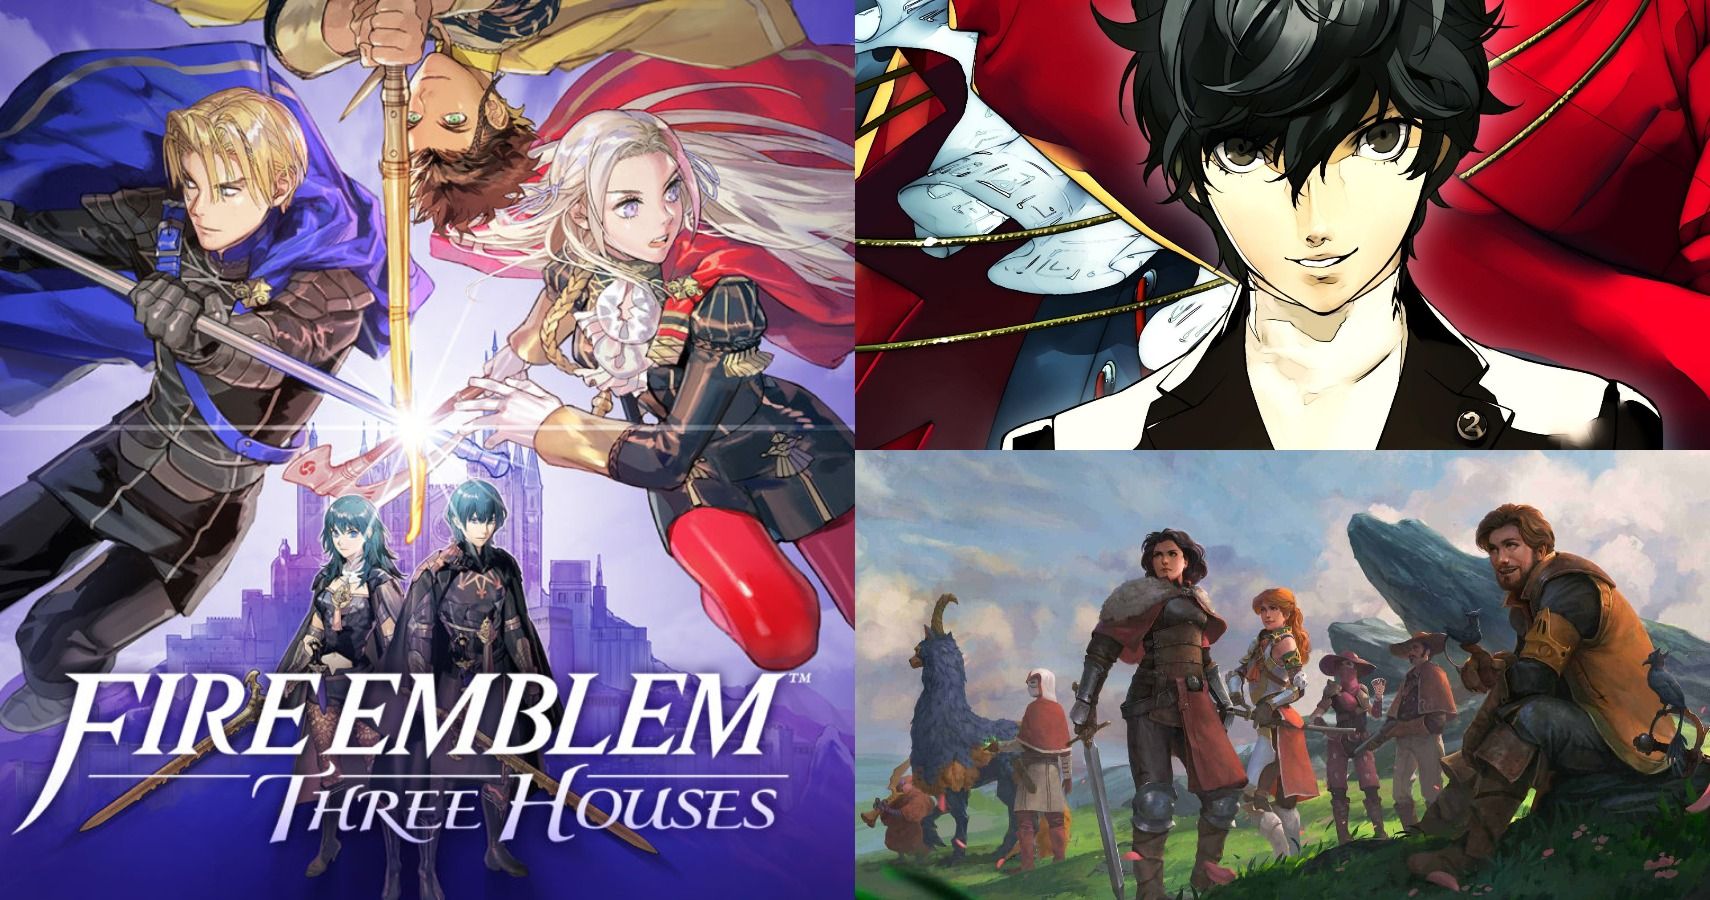 17 Games To Play If You Loved Fire Emblem: Three Houses